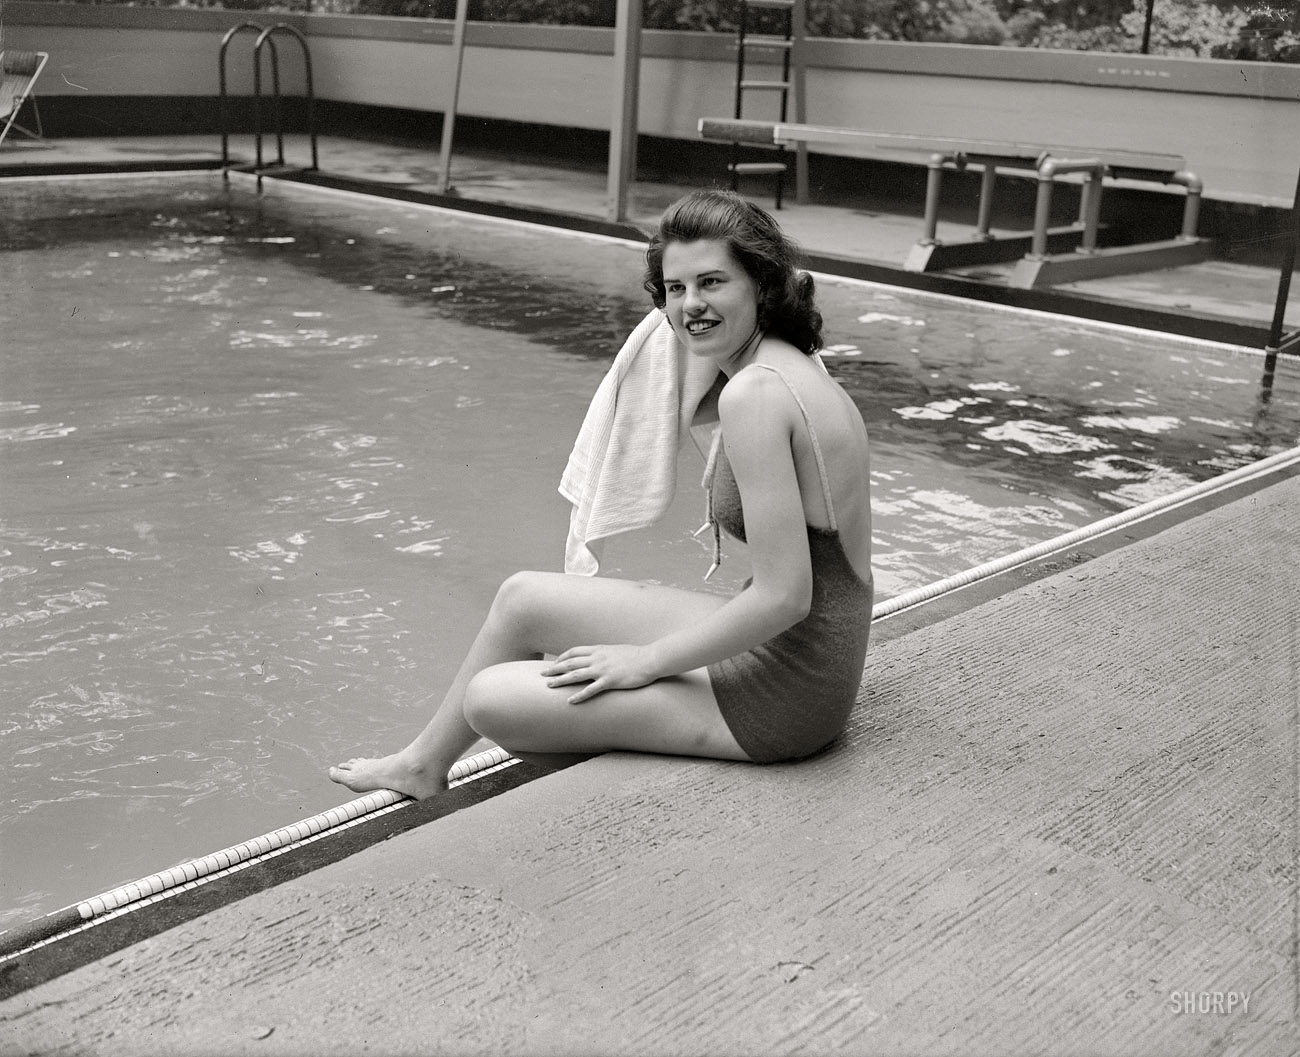 Washington, D.C., circa 1937. "Jean Wallace." The daughter of Henry A. Wallace, Secretary of Agriculture and future Vice President, at the Wardman Park Hotel pool. Harrs & Ewing Collection glass negative. View full size.